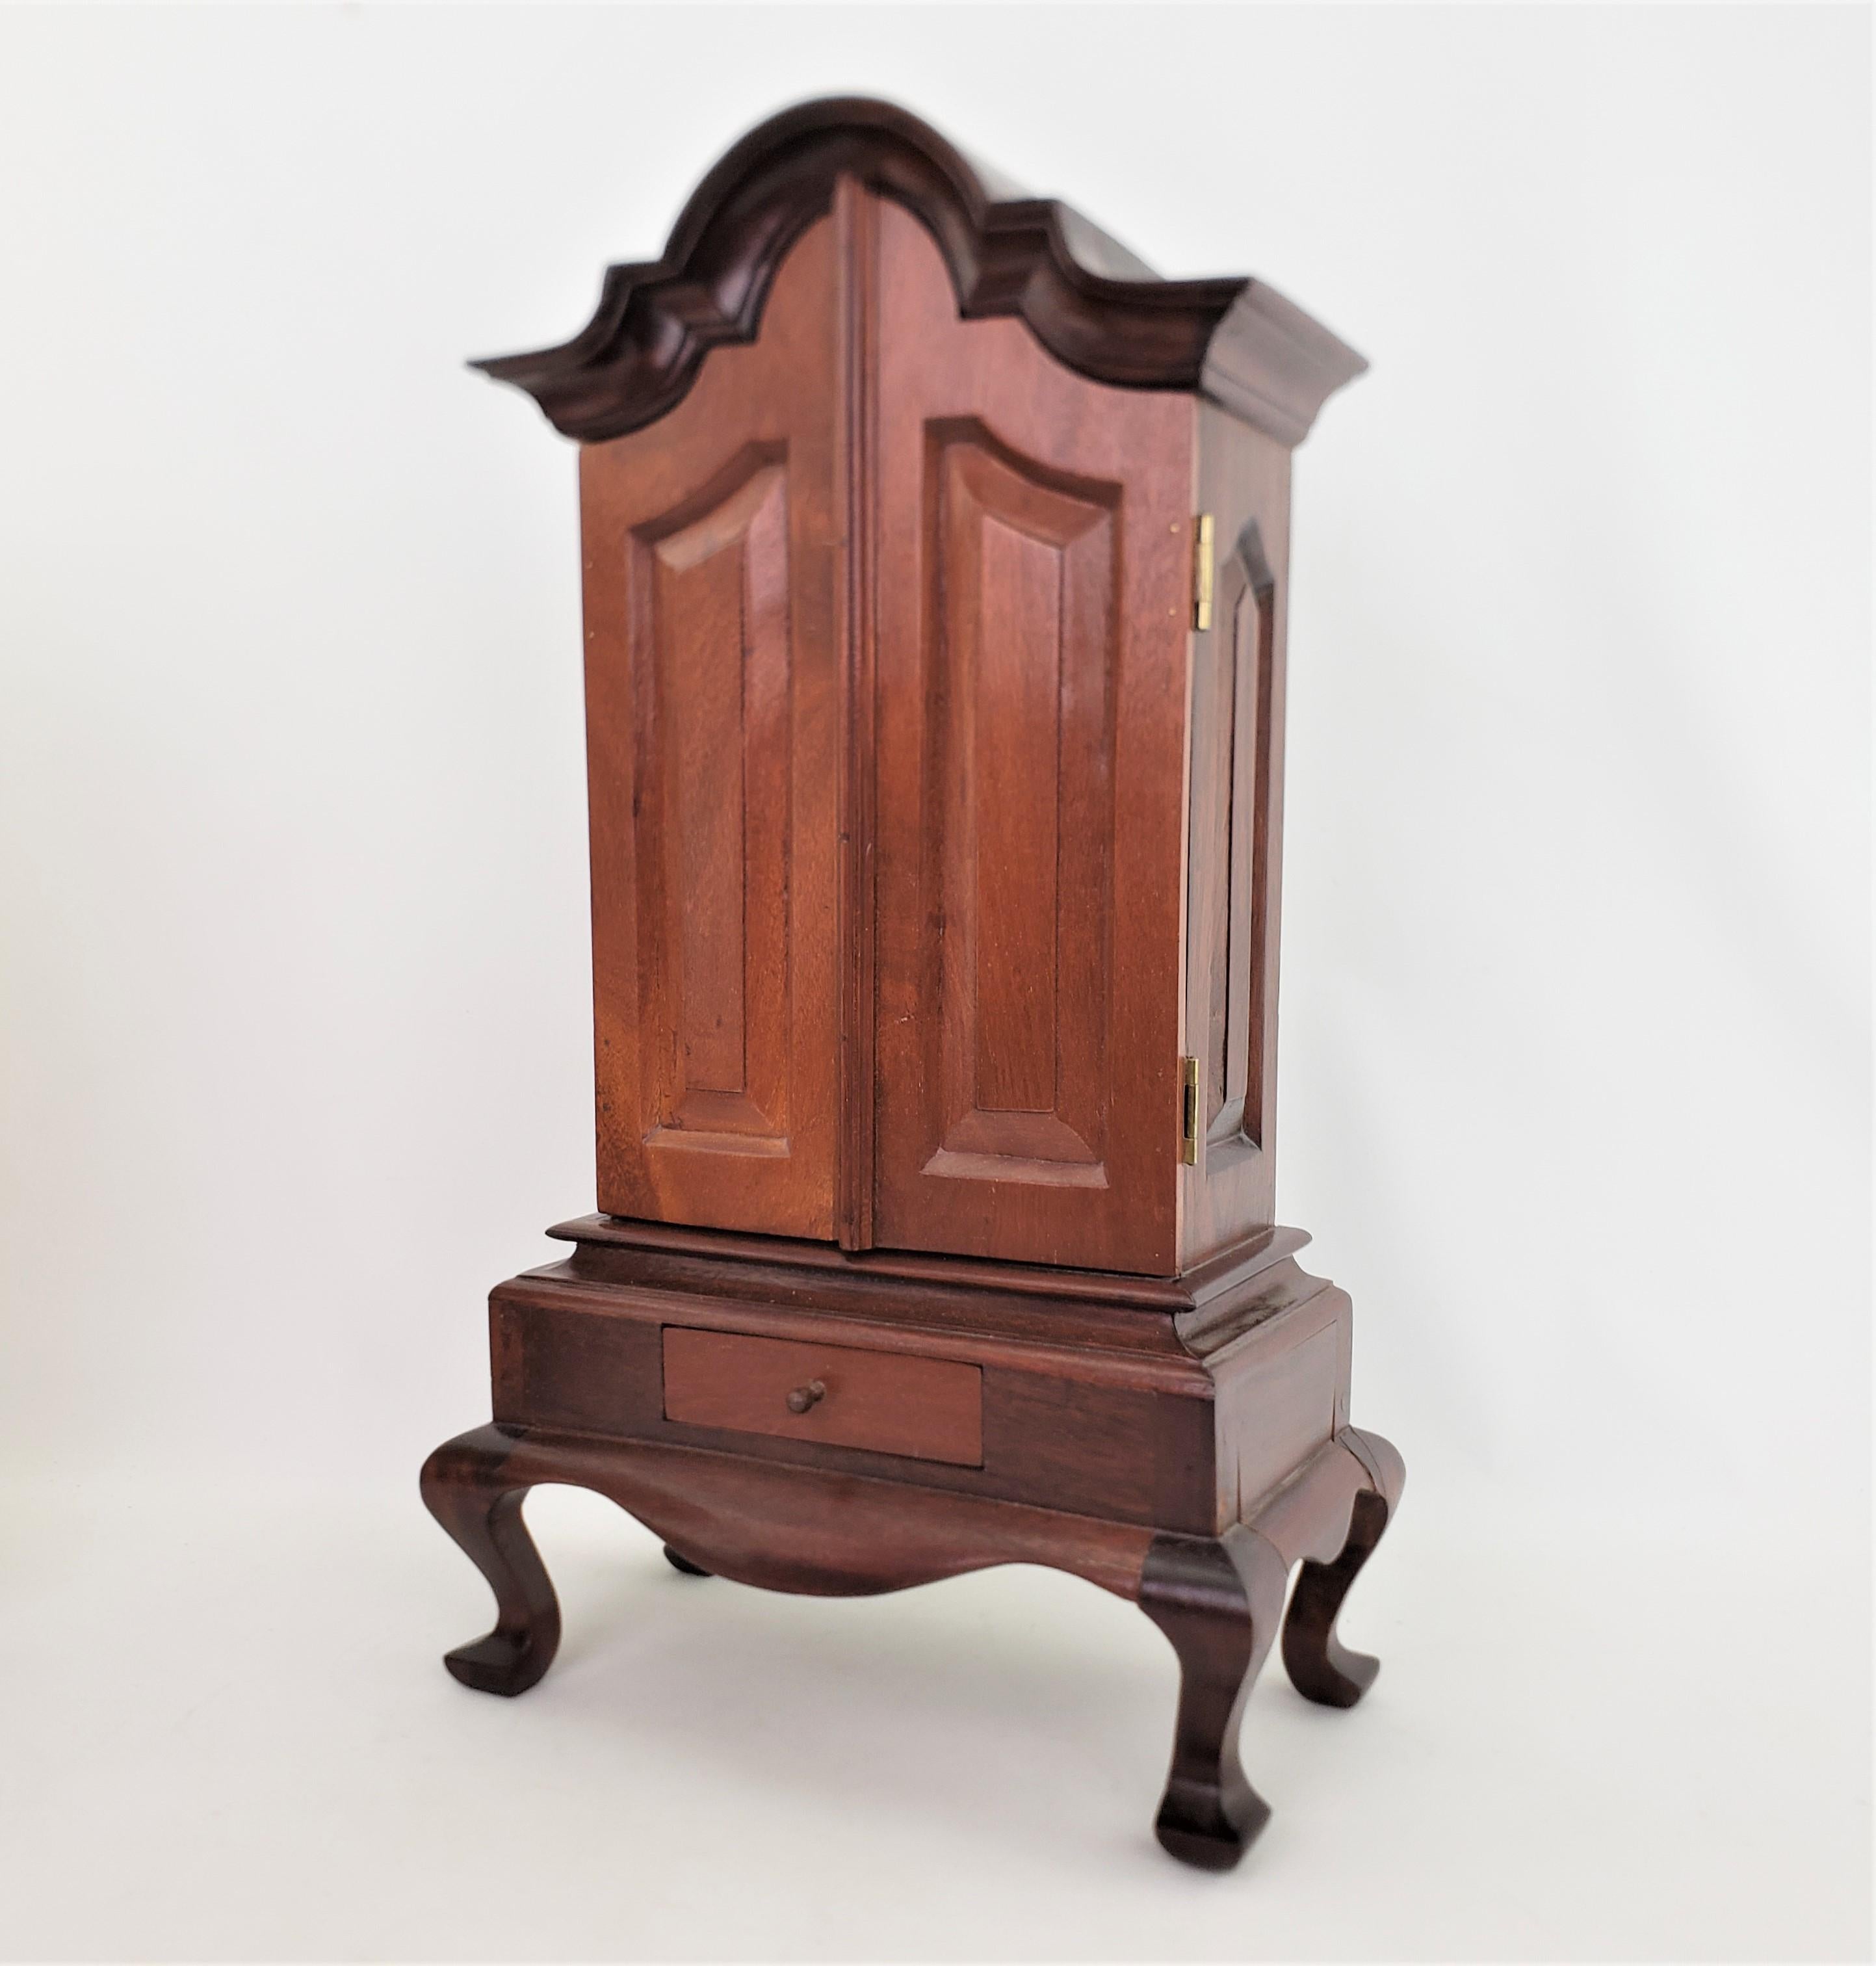 This very well executed miniature wooden cabinet it unsigned, but presumed to have originated from England and date to approximately 1940 and done in a Queen Anne style. The cupboard is made of solid walnut and has an elaborate serpentine top and